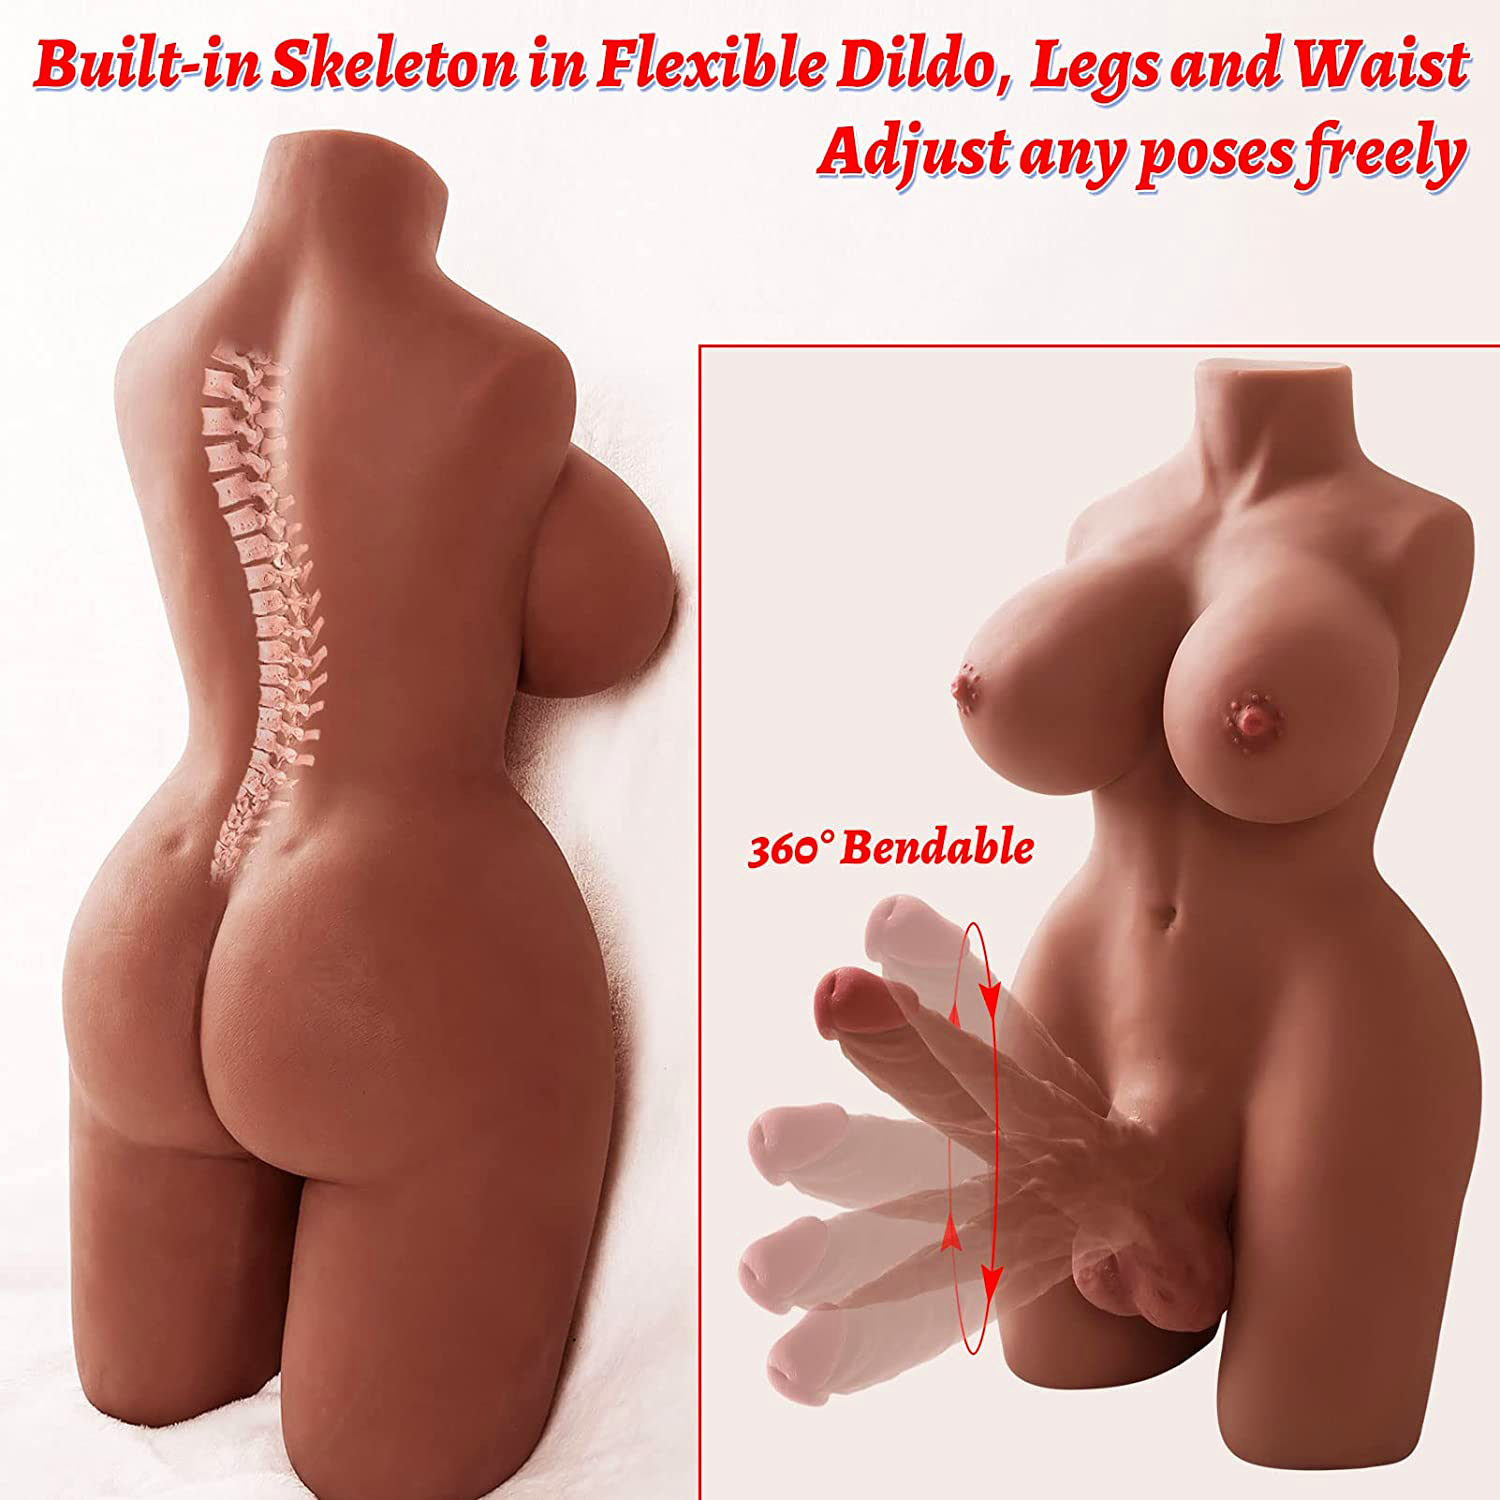 Hugh Penis Silicone Brown Shemale Sex Doll Torso Lifelike Dildo Breasts and Anal Transsexual Love Dolls